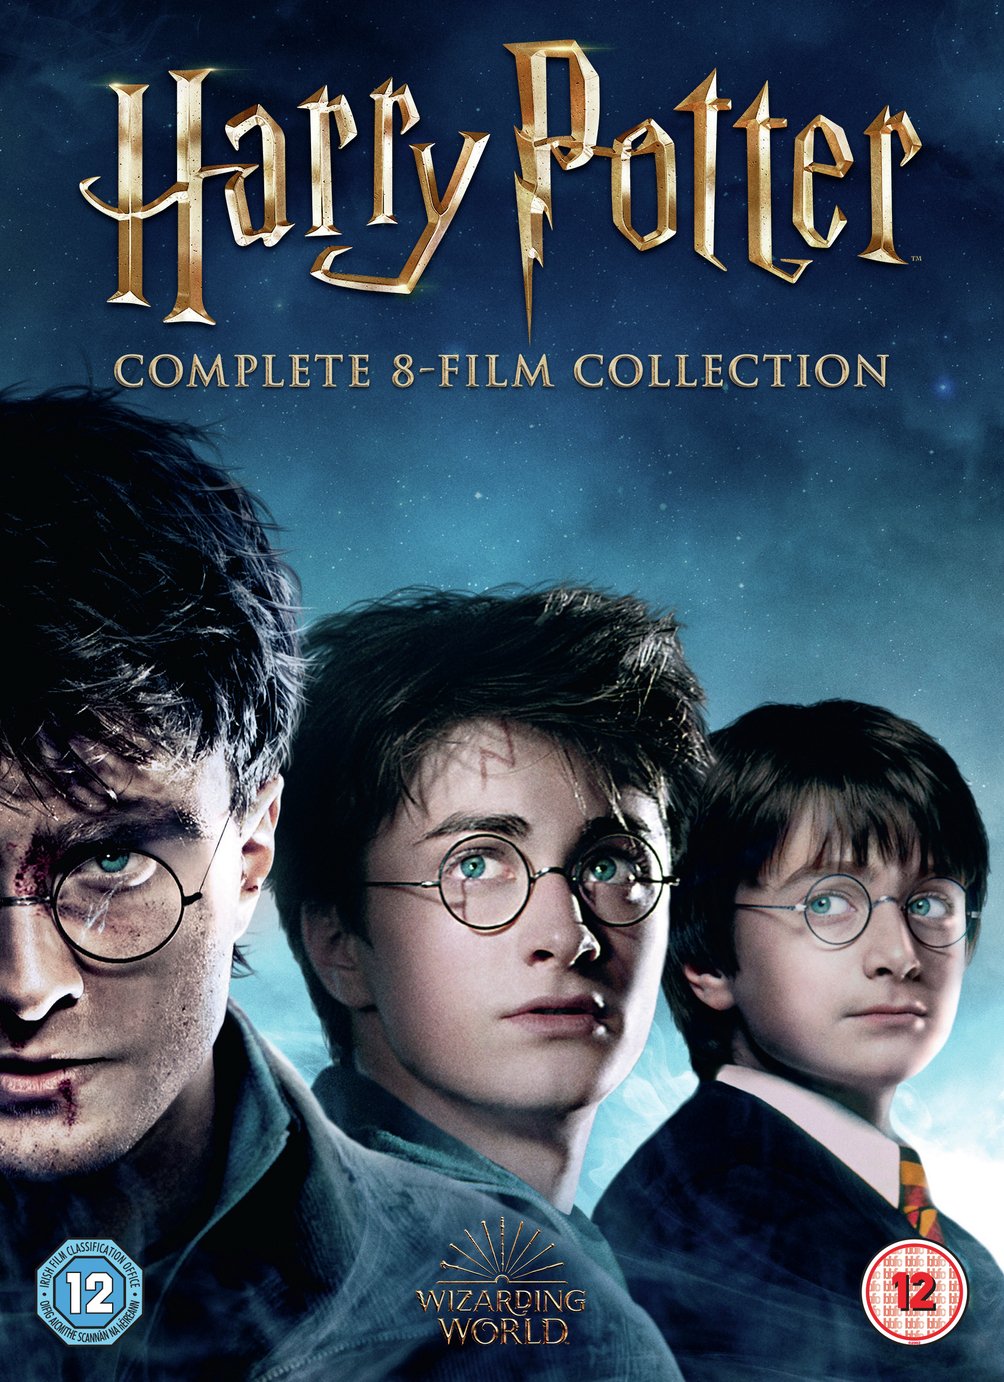 Harry Potter: The Complete DVD Box Set Review